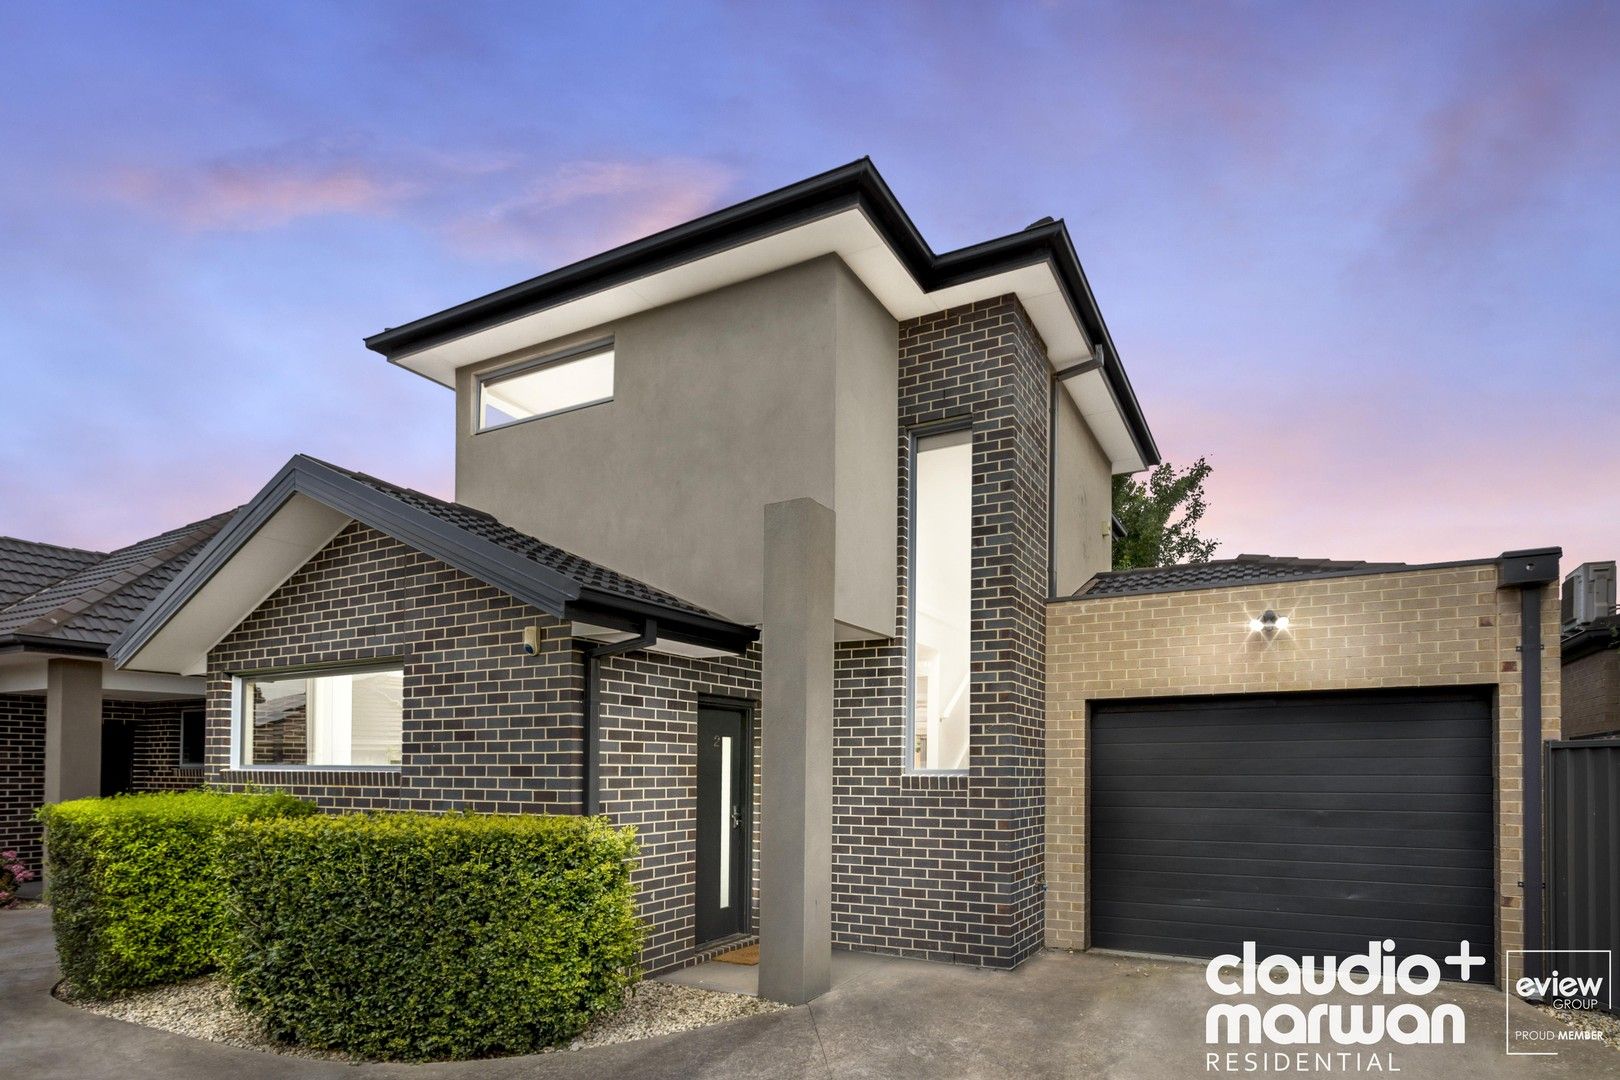 2 bedrooms Townhouse in 2/21 Bourchier Street GLENROY VIC, 3046